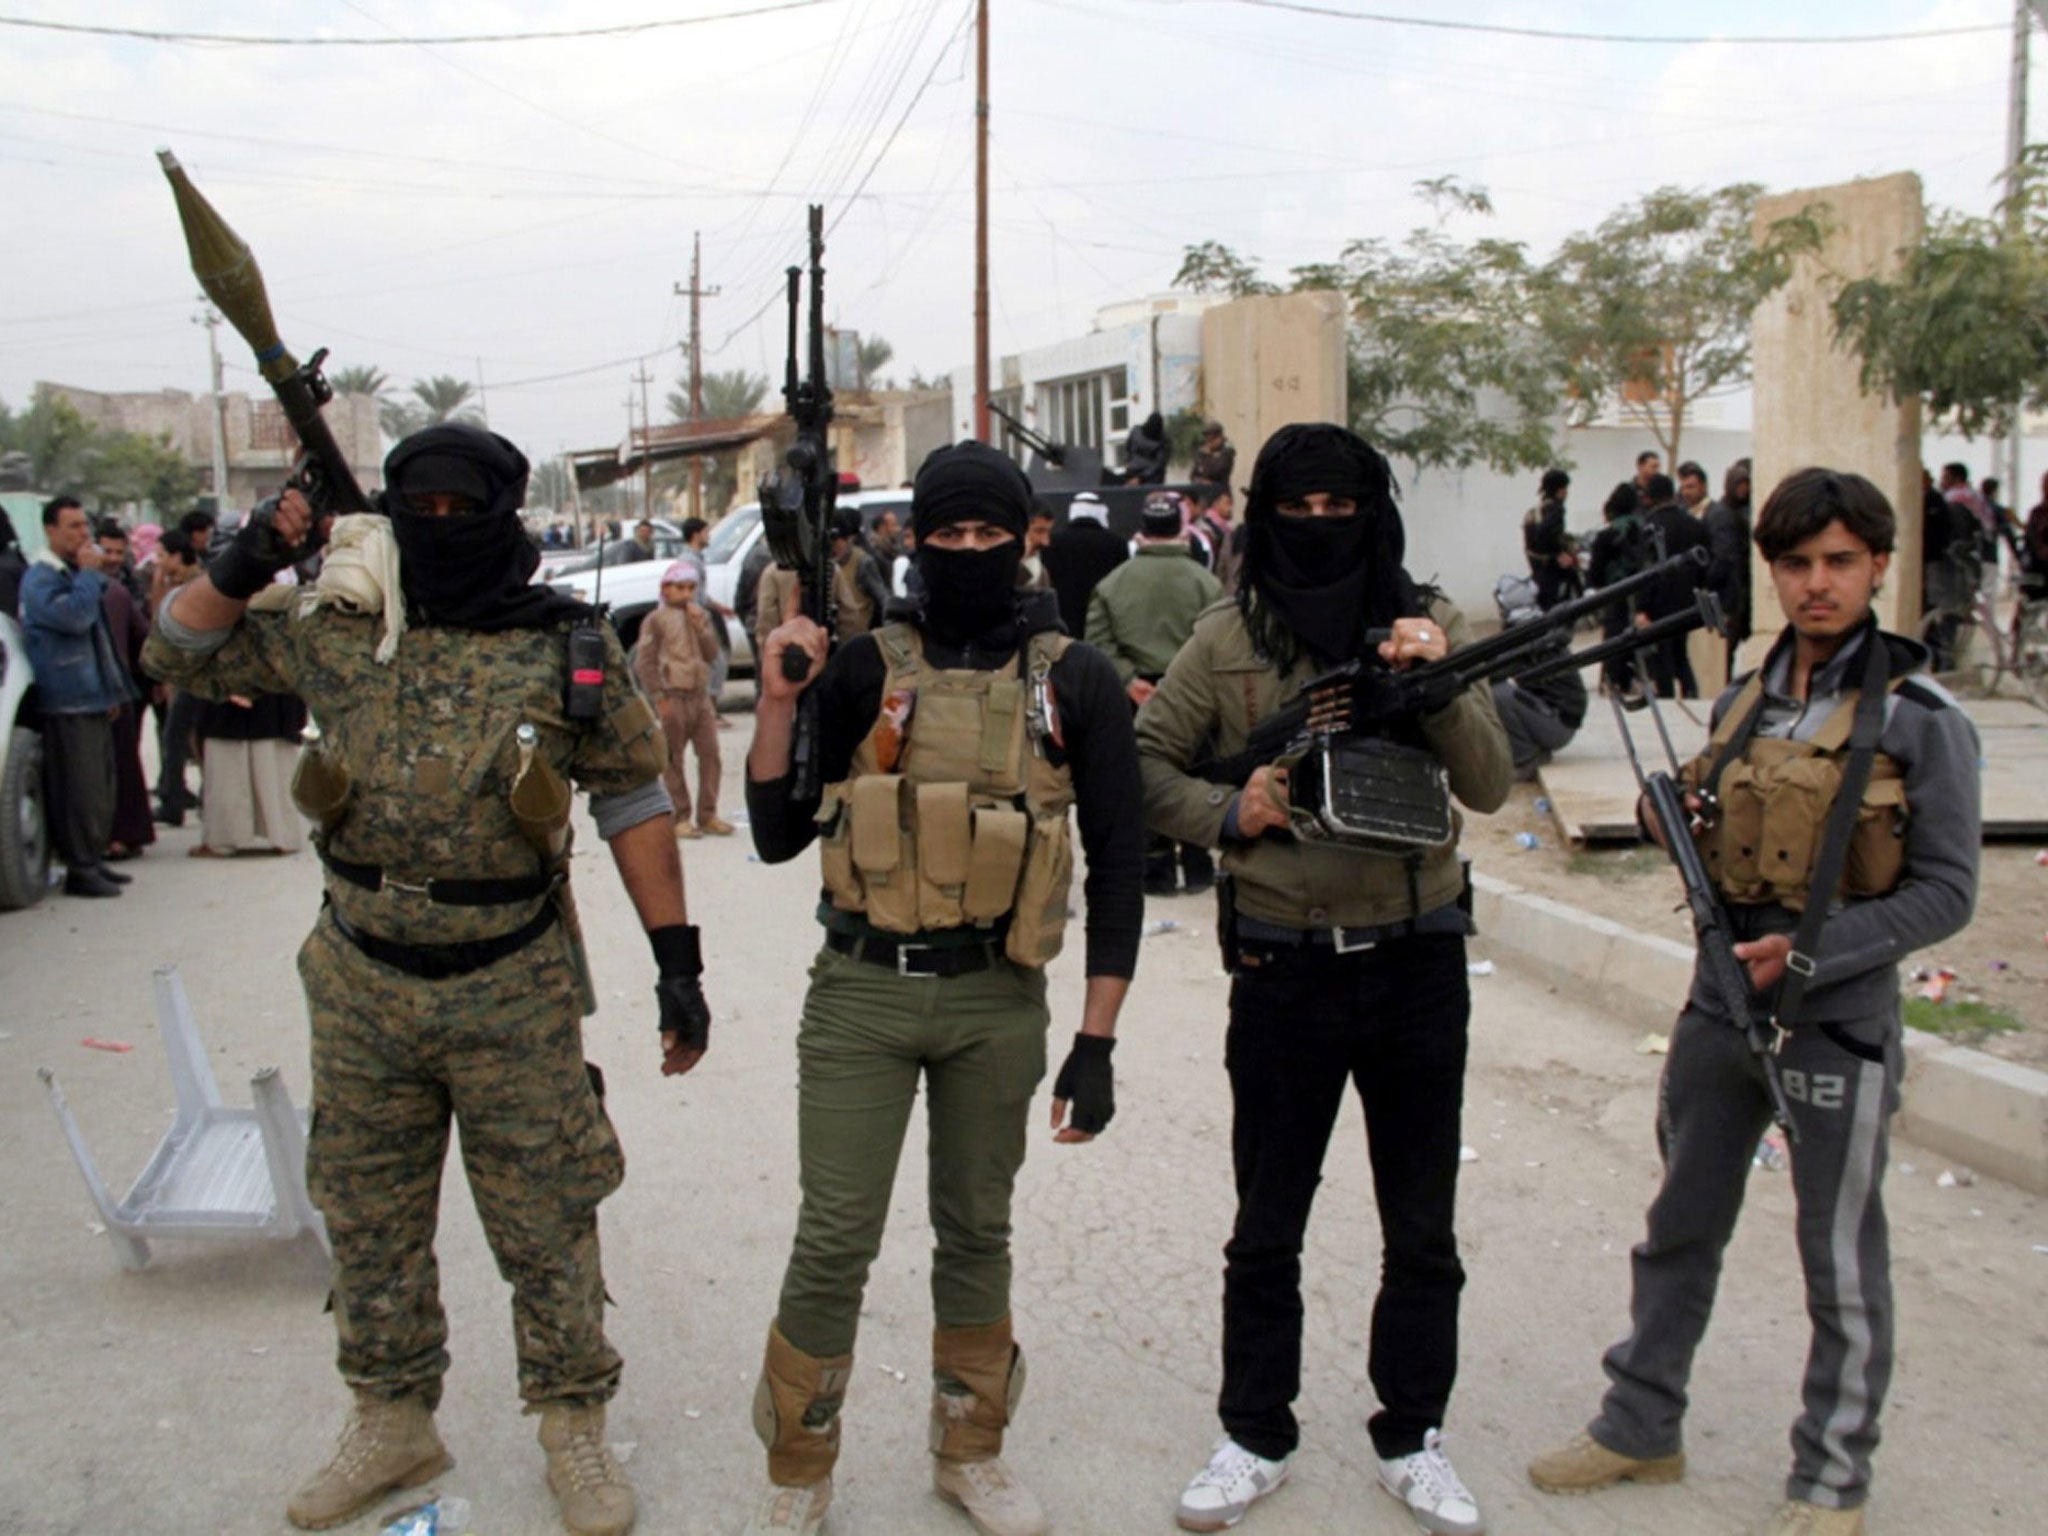 Masked Sunni fighters in Ramadi on Sunday following raids by government forces